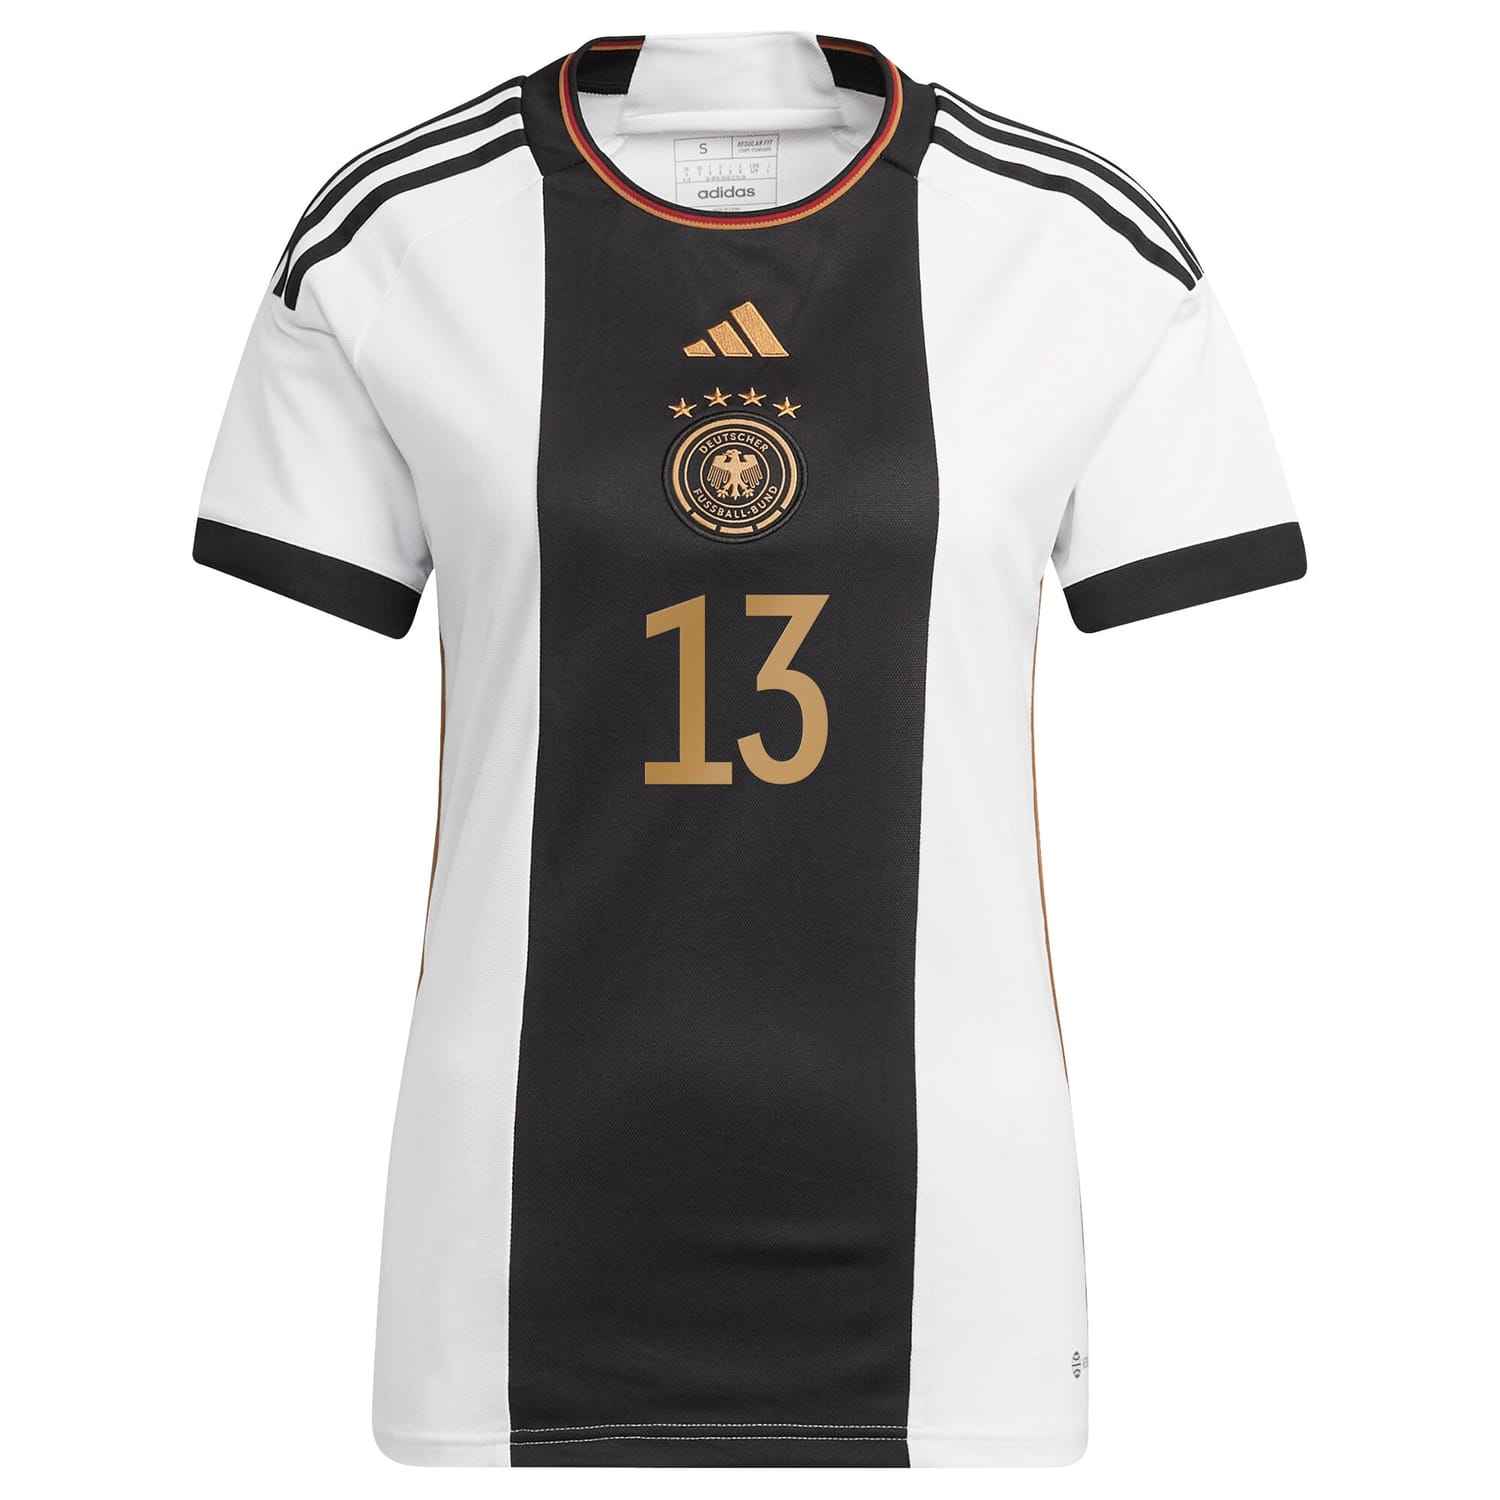 Germany National Team Home Jersey Shirt White 2022-23 player Thomas Müller printing for Women